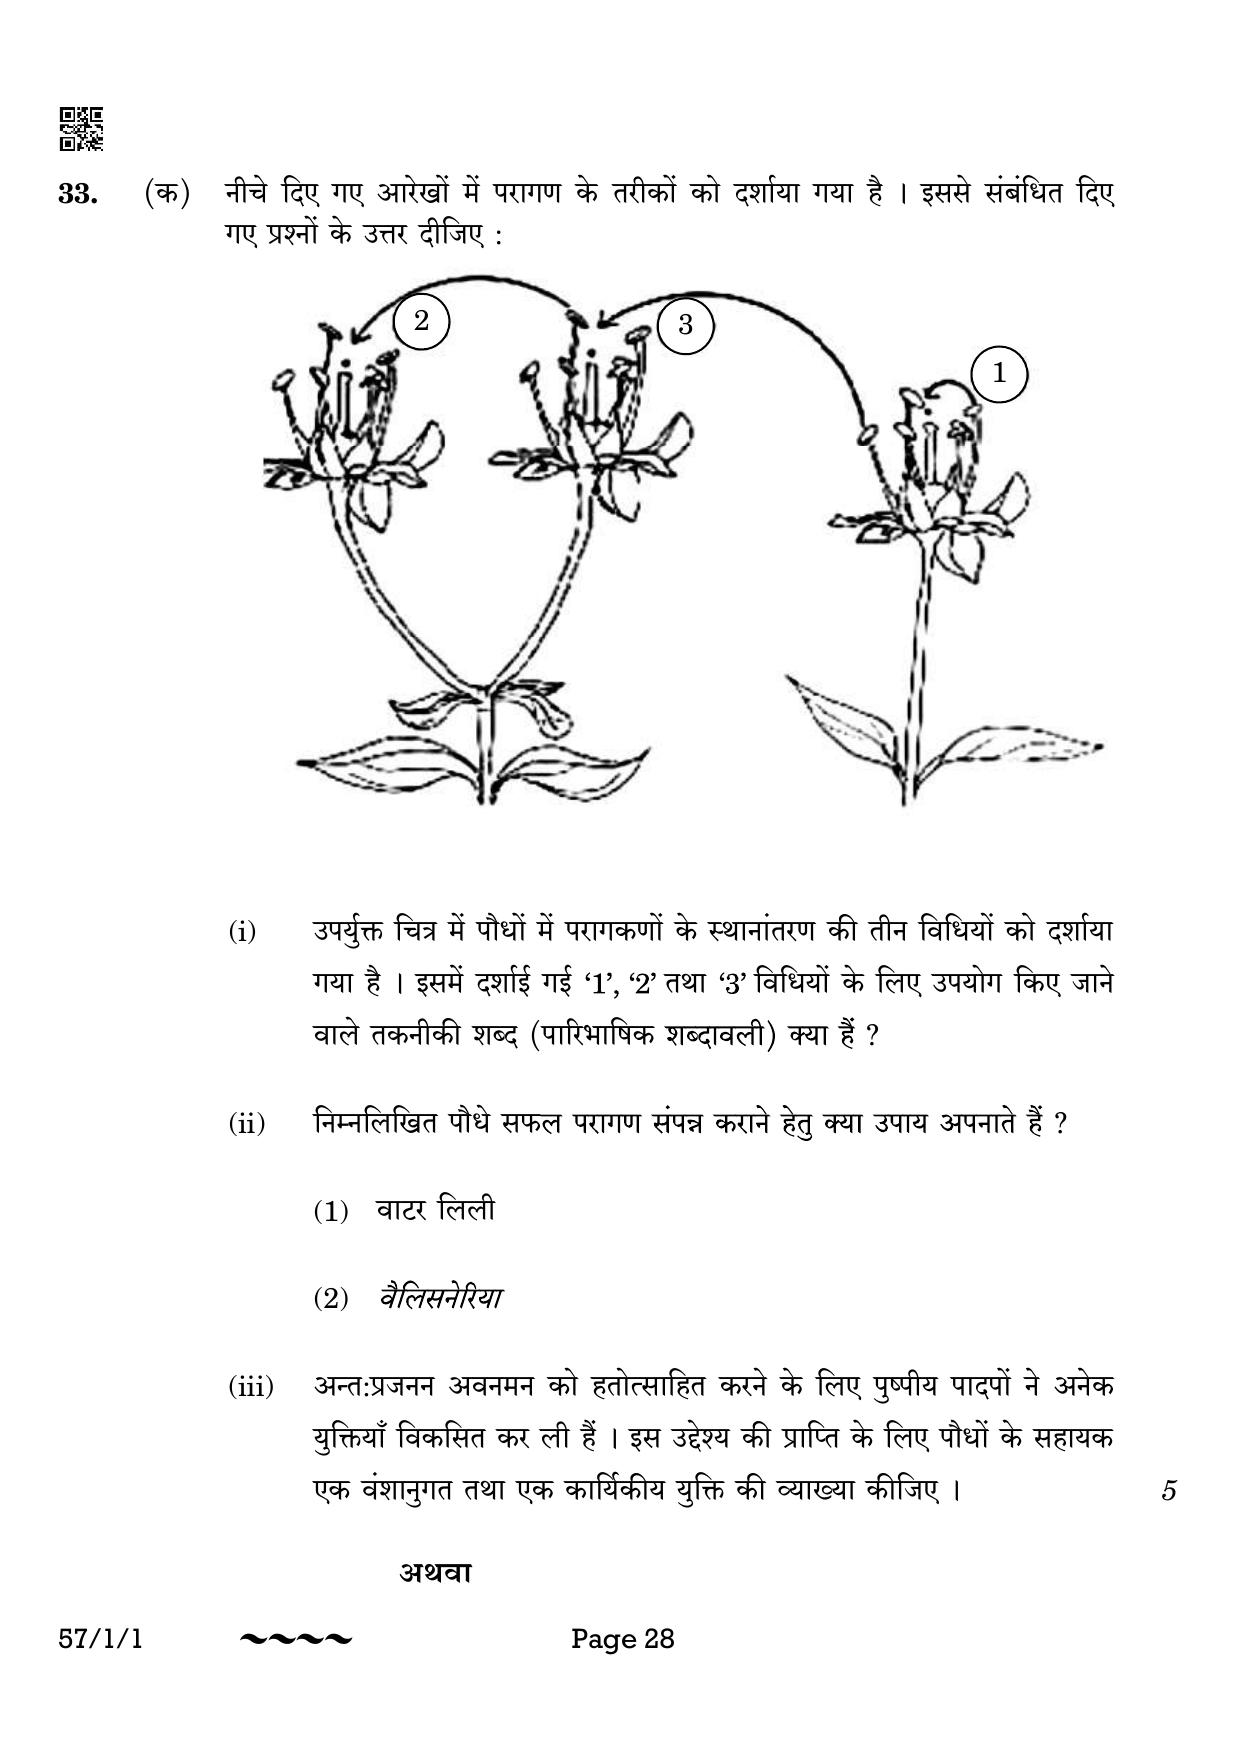 CBSE Class 12 57-1-1 Biology 2023 Question Paper - Page 28